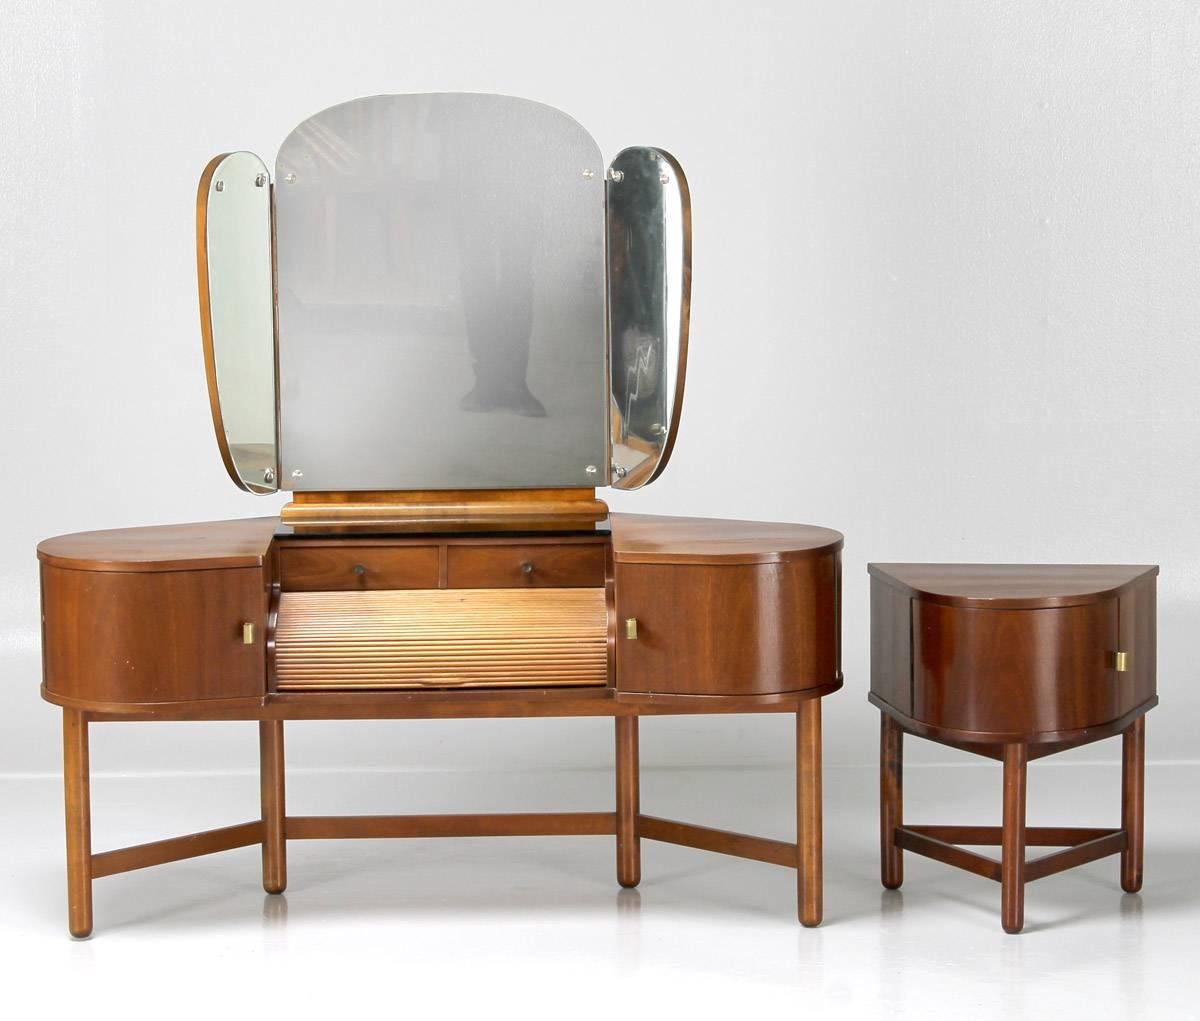 Scandinavian Modern 1930s Angle Vanity Table and Its Occasional Table by Martinus Petersen For Sale